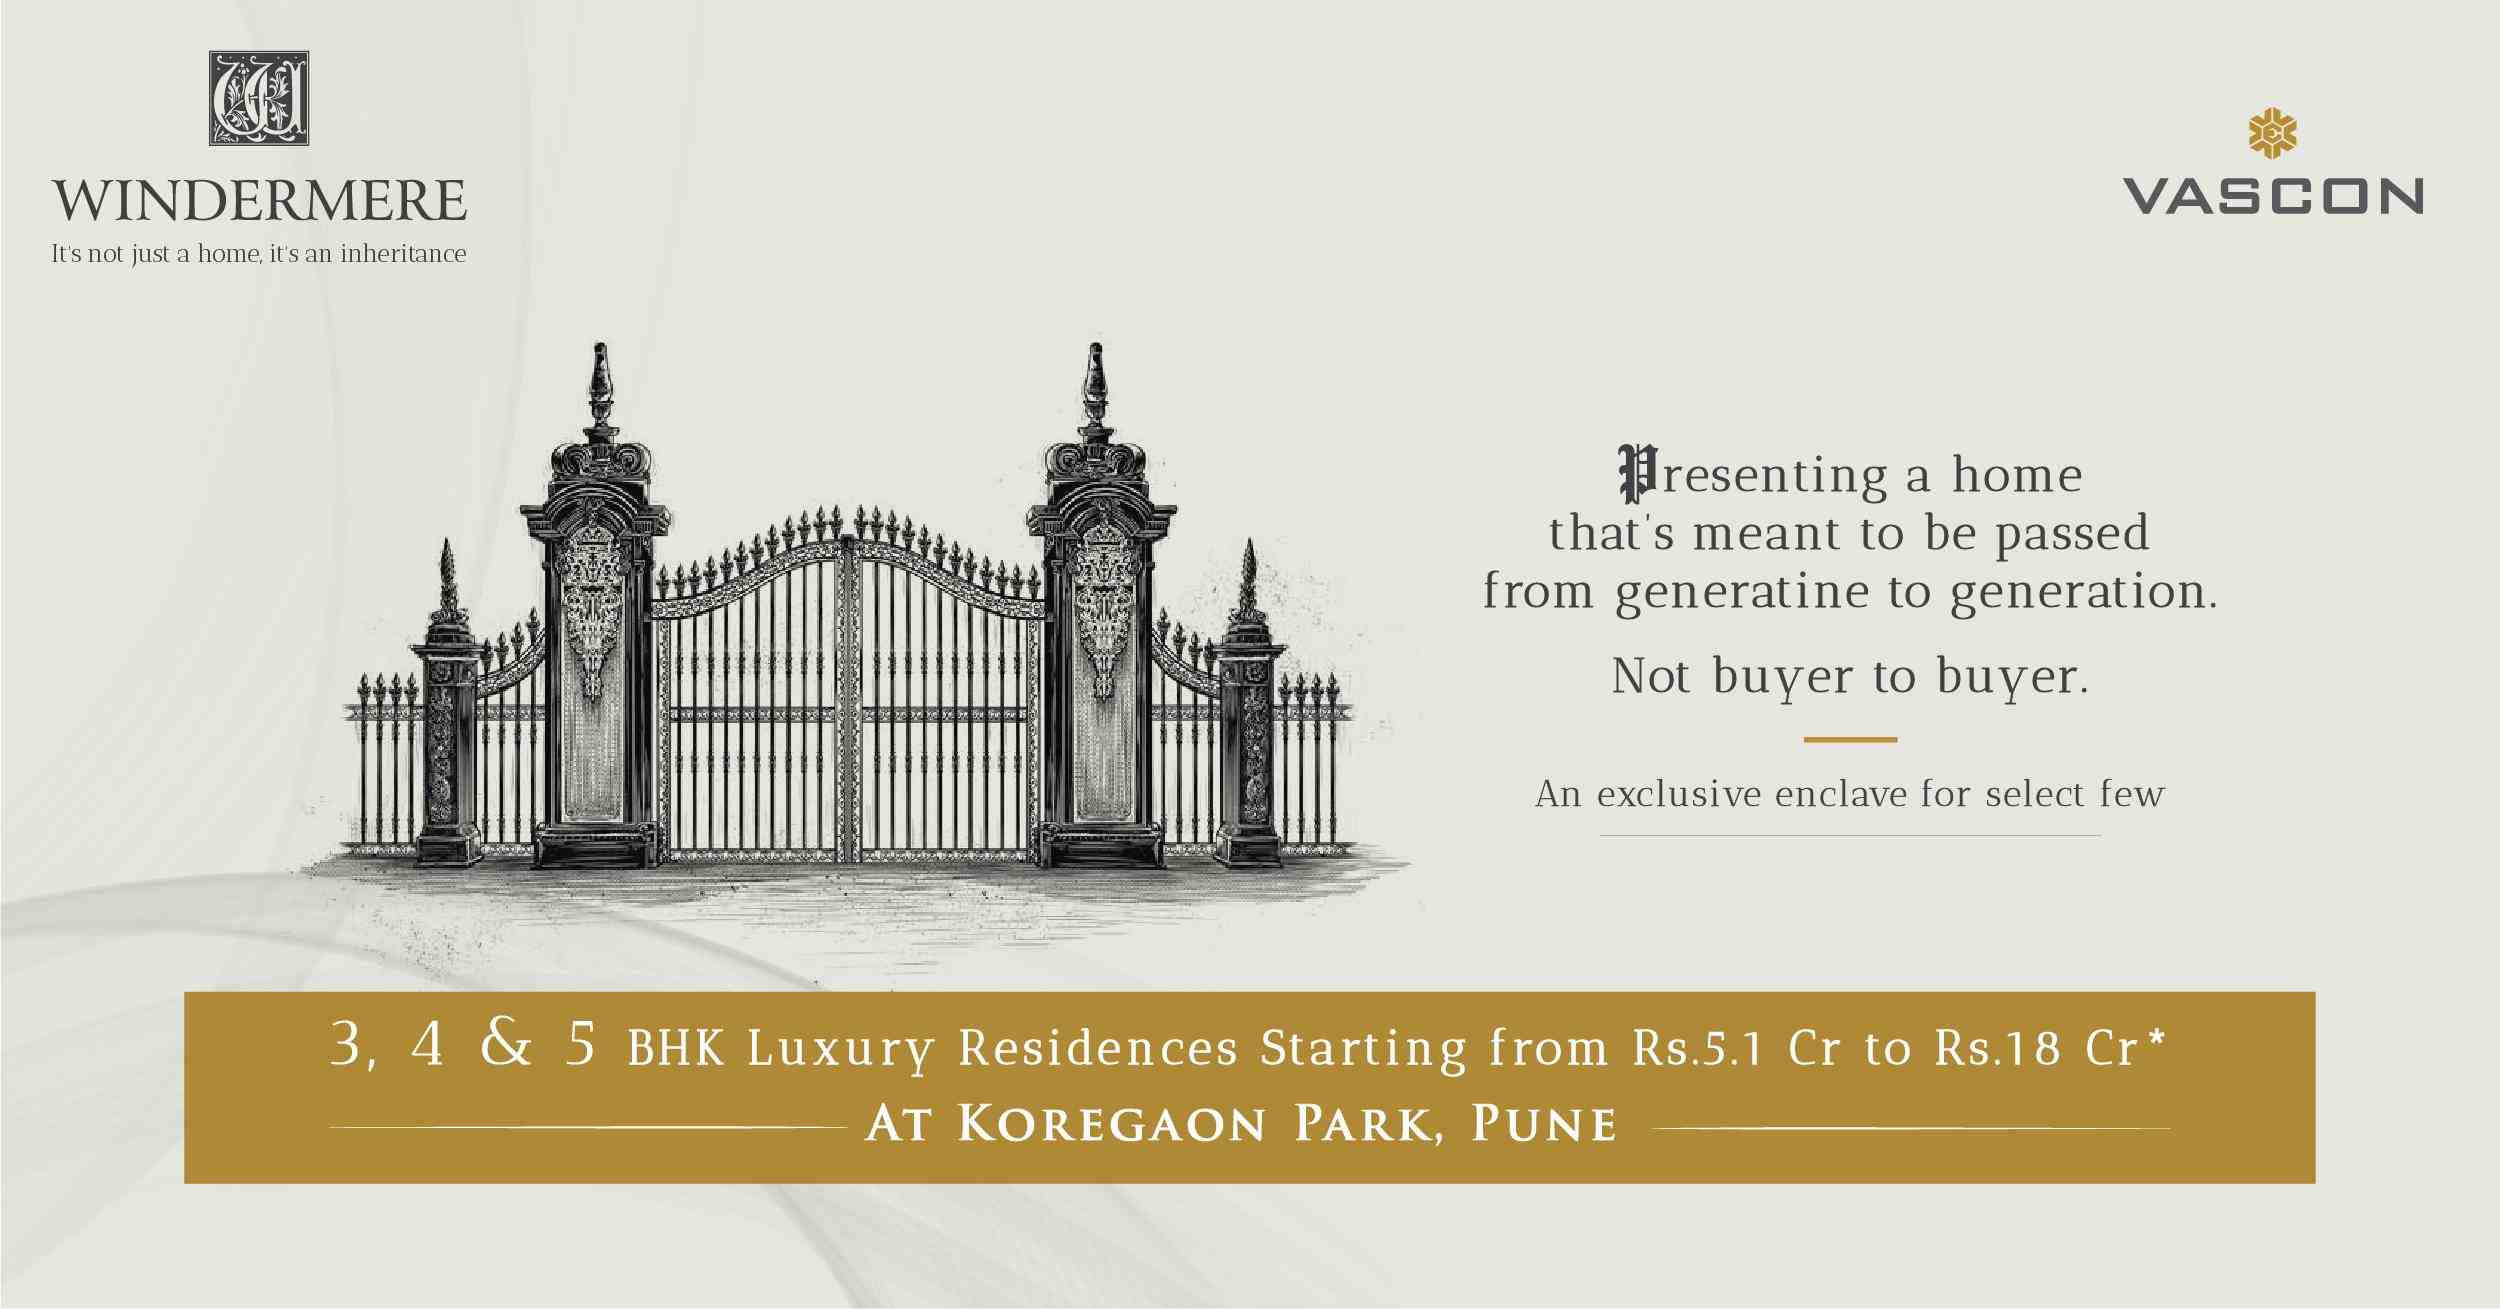 Vascon Windermere presents luxury residences starting at Rs. 5.1 cr. to 18 cr. in Pune